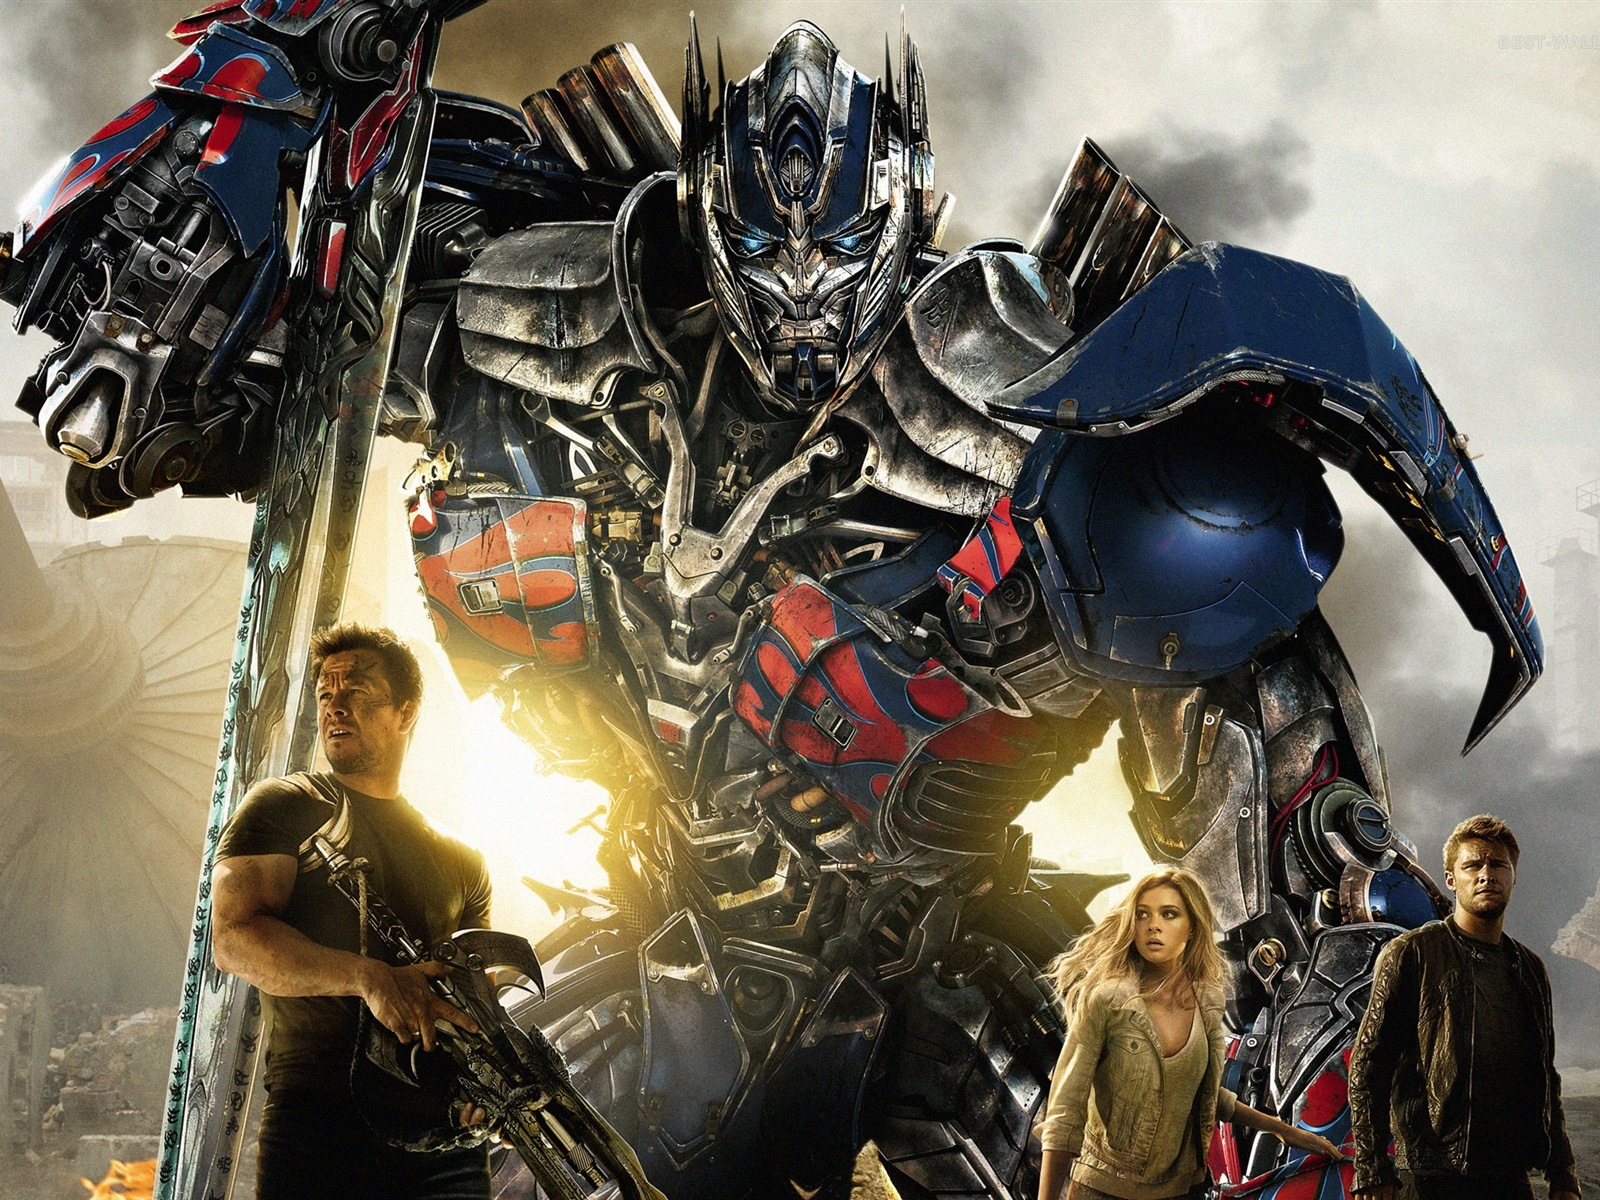 2014 Transformers: Age of Extinction HD wallpapers #1 - 1600x1200